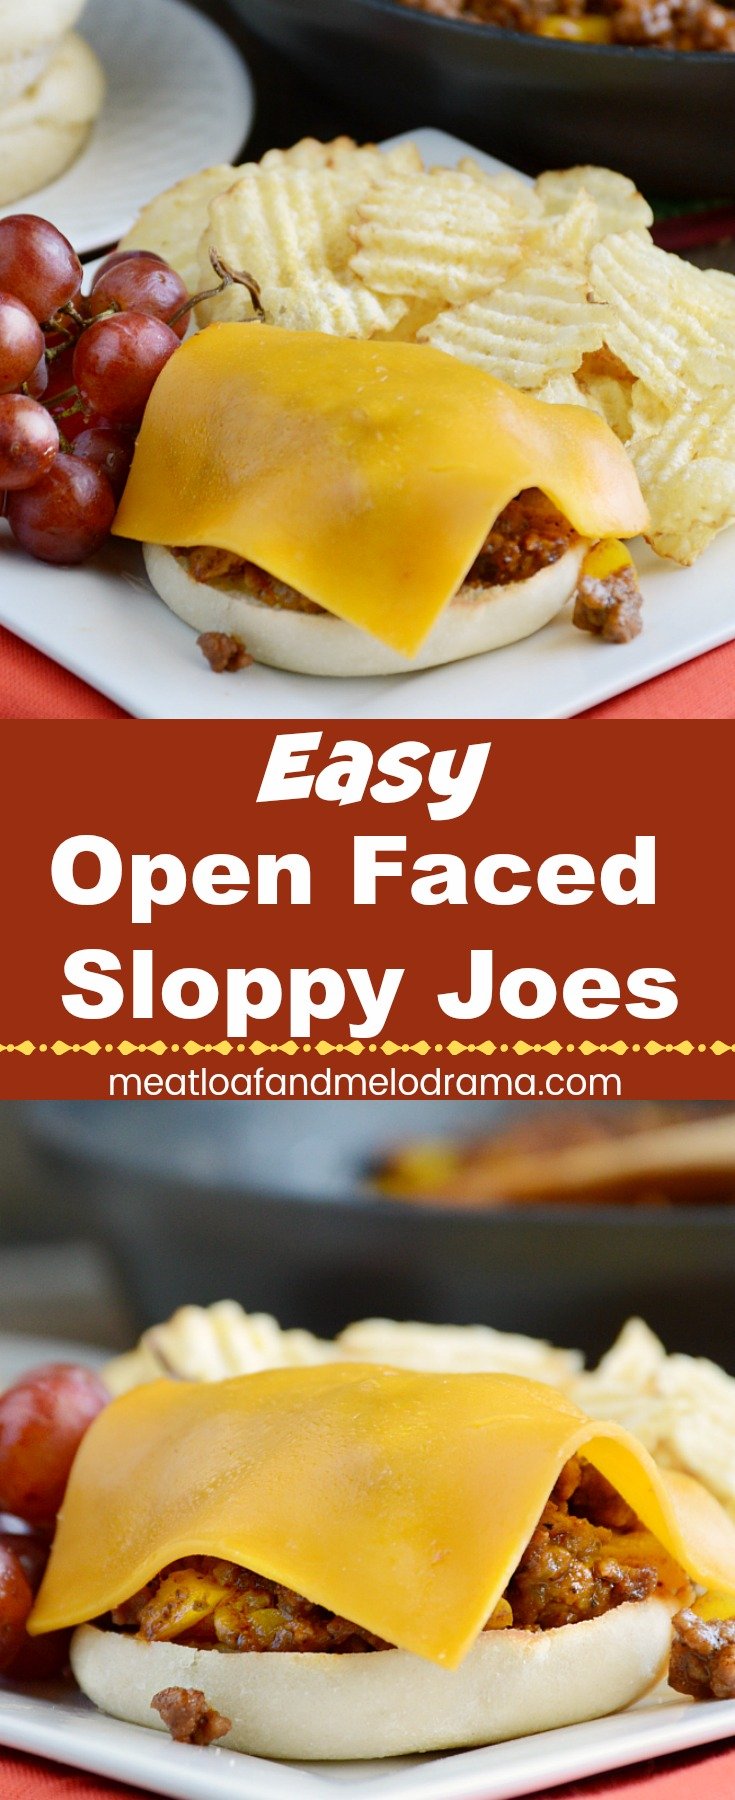 Open Faced Sloppy Joes - a fast easy dinner made with ground beef and bell peppers in a tangy barbecue sauce. Serve over English muffin halves and top with cheddar cheese. Ready in 20 minutes and kid approved! from Meatloaf and Melodrama